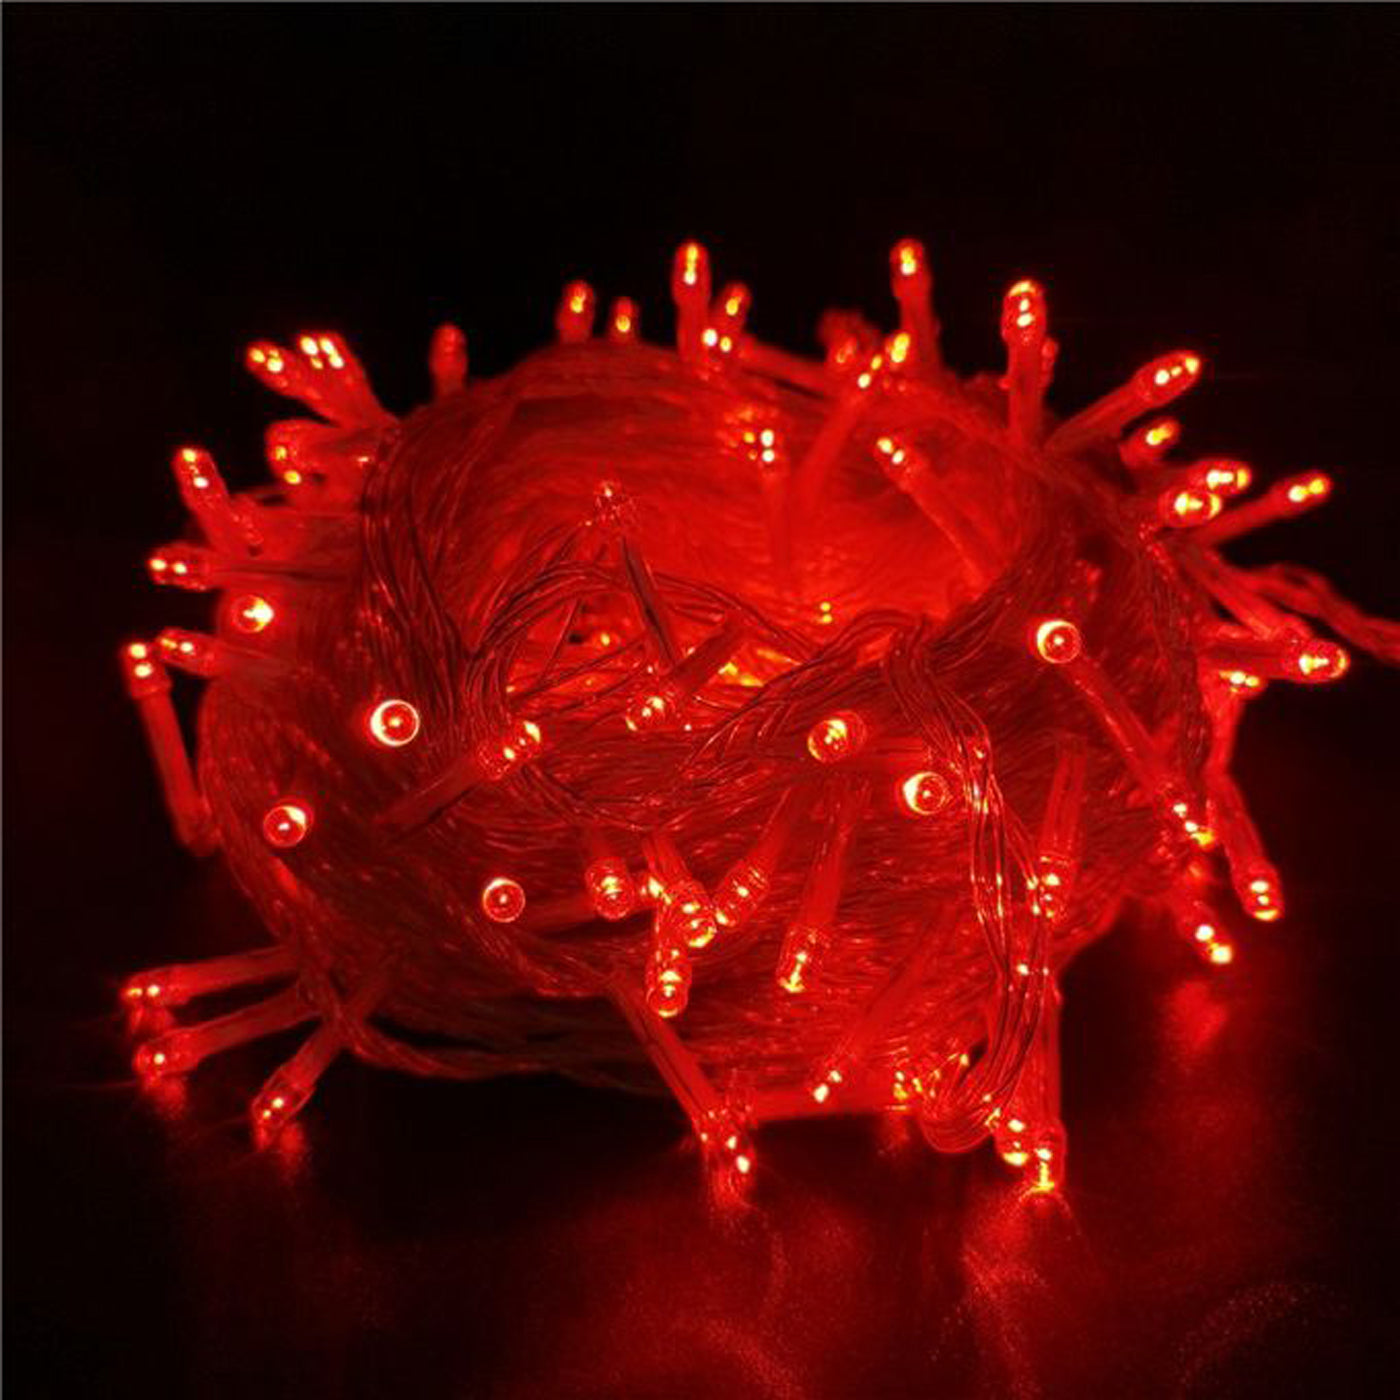 DecorTwist LED String Light for Home and Office Decor| Indoor & Outdoor Decorative Lights|Christmas |Diwali |Wedding | Christmas | Diwali | Wedding |12 Meter Length |(Pack of 4) (Red)